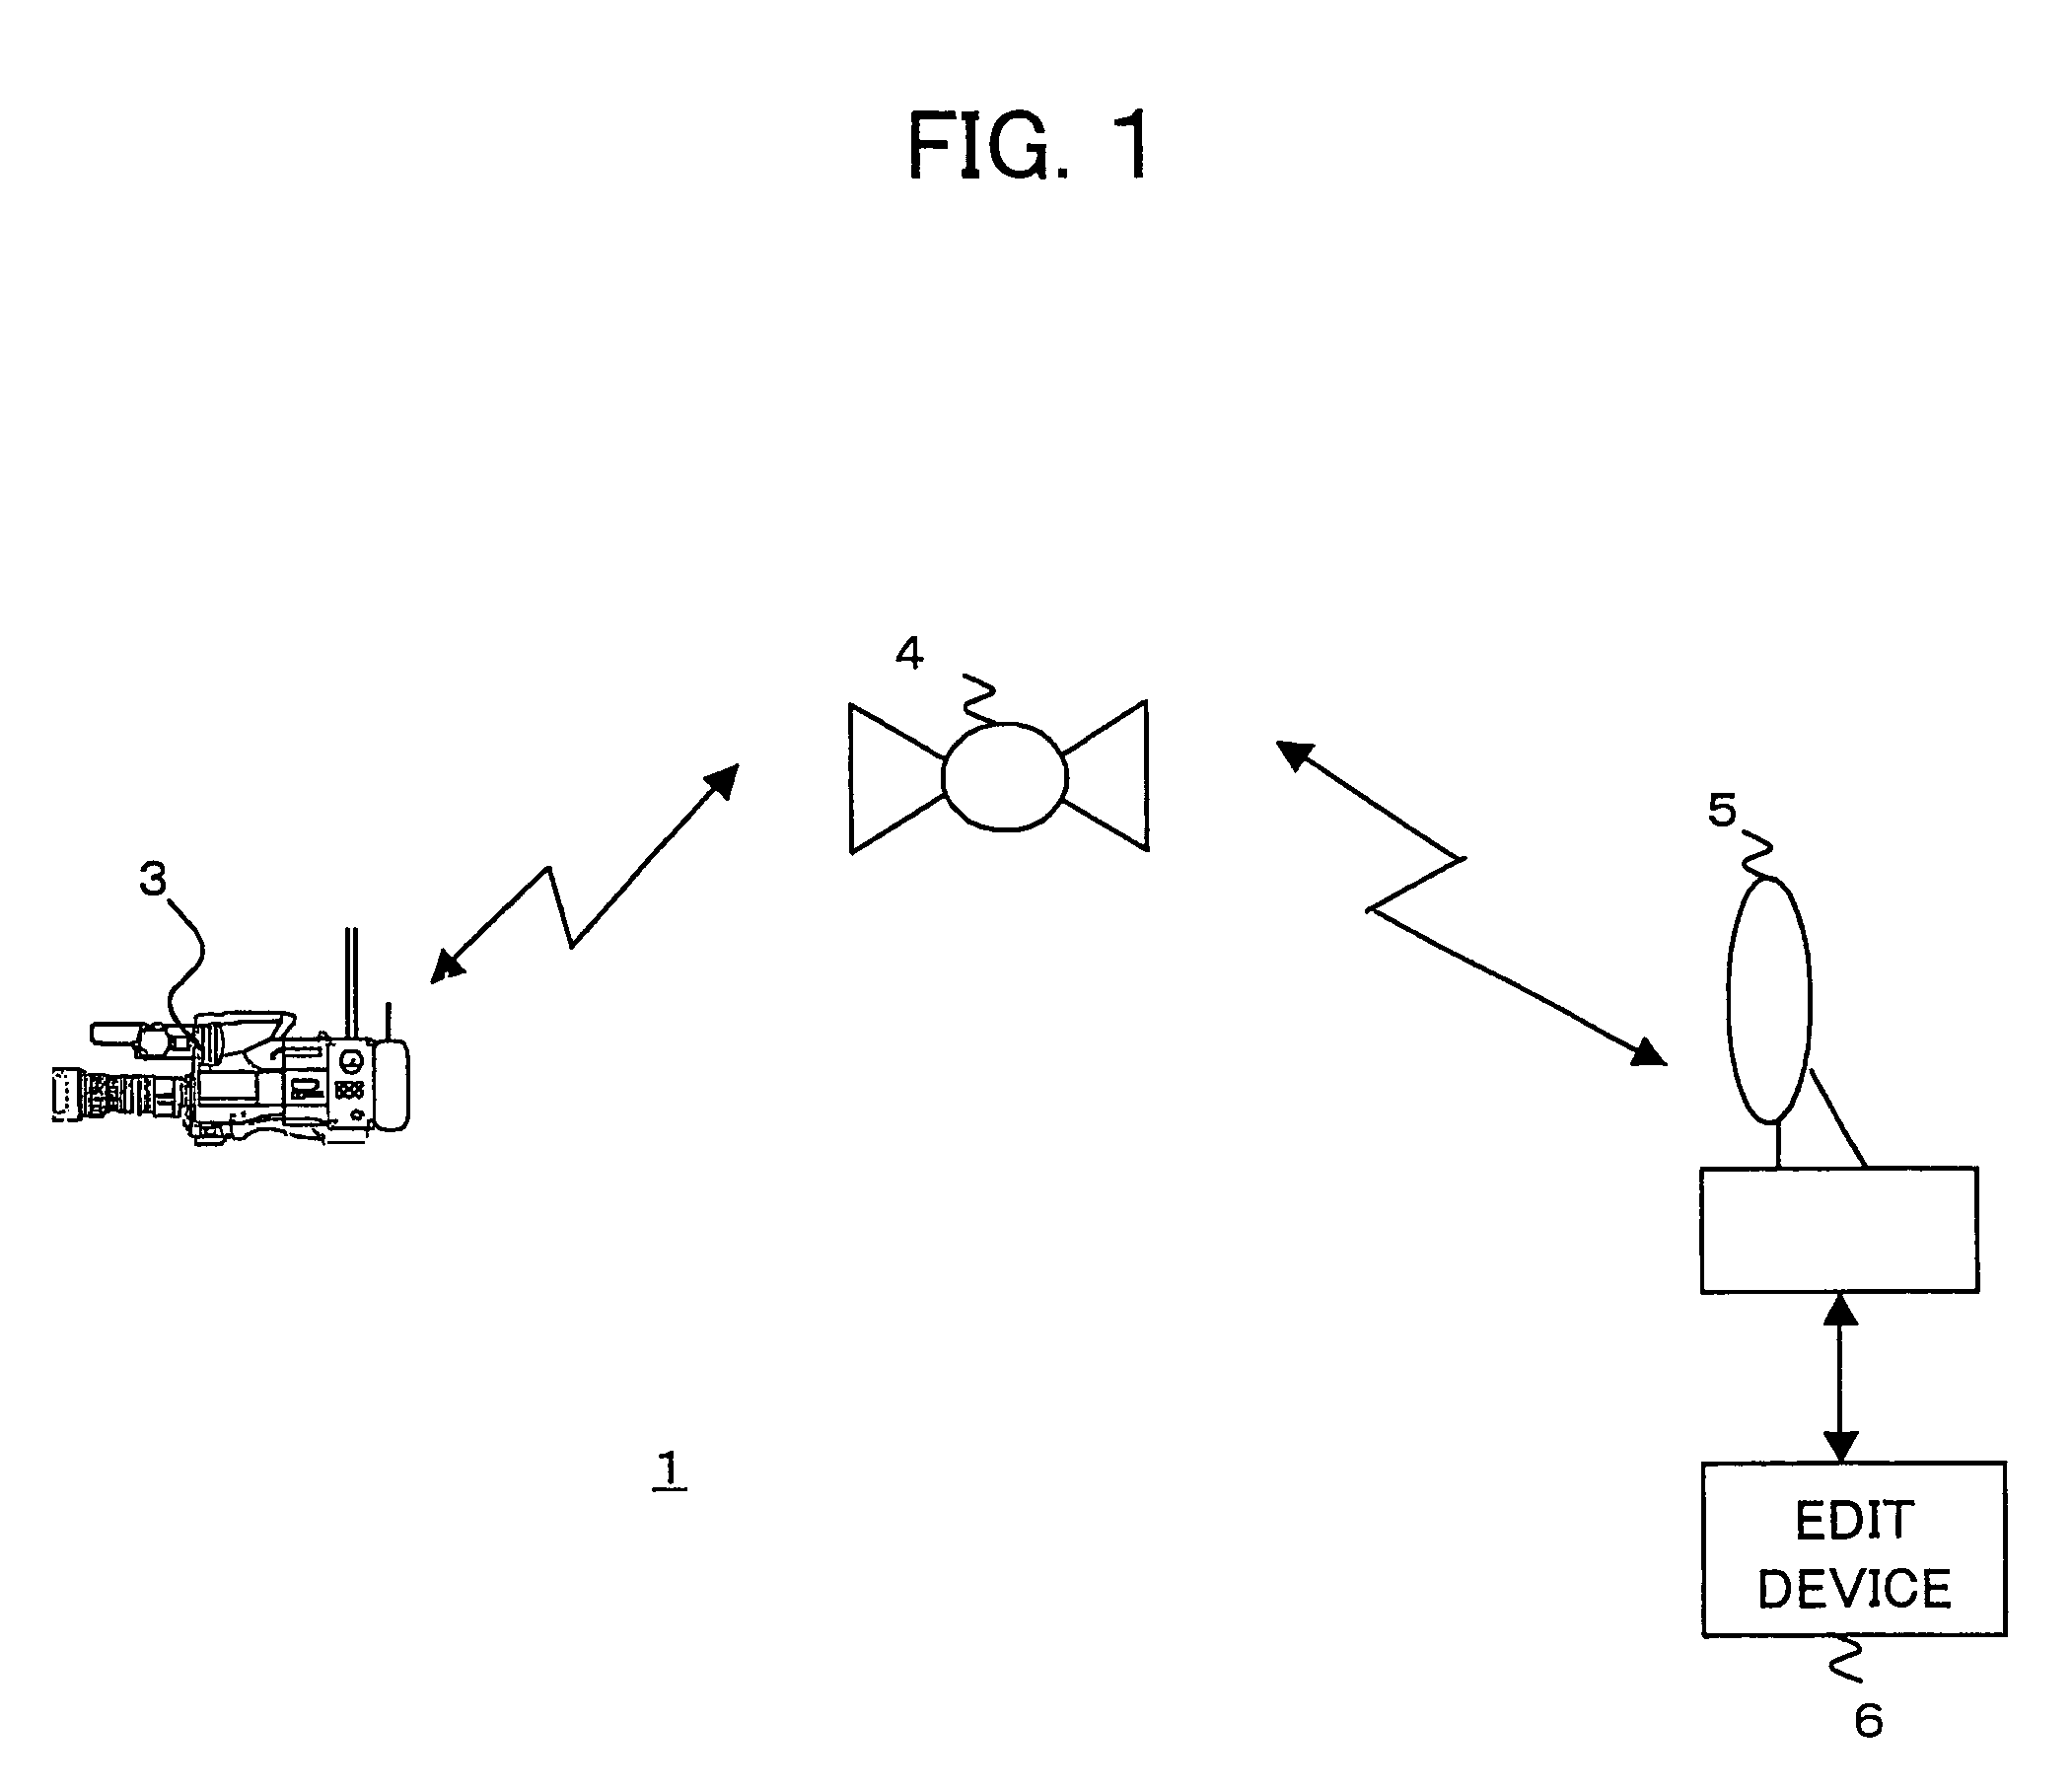 Method of processing data, system of the same and video recording system